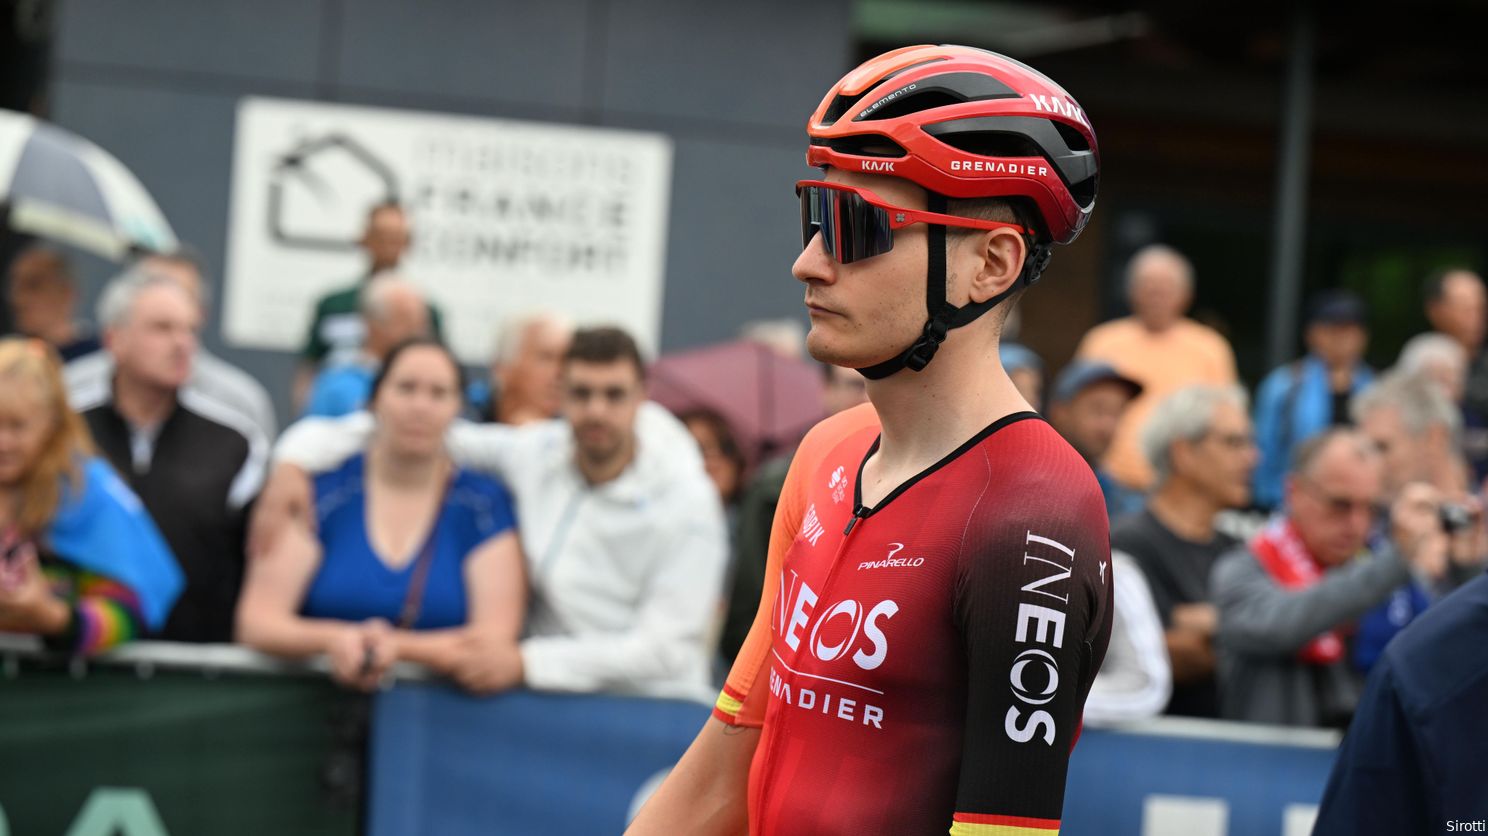 INEOS Grenadiers opts for maximal horse power in Tour de France mountains, Rodríguez appointed team leader